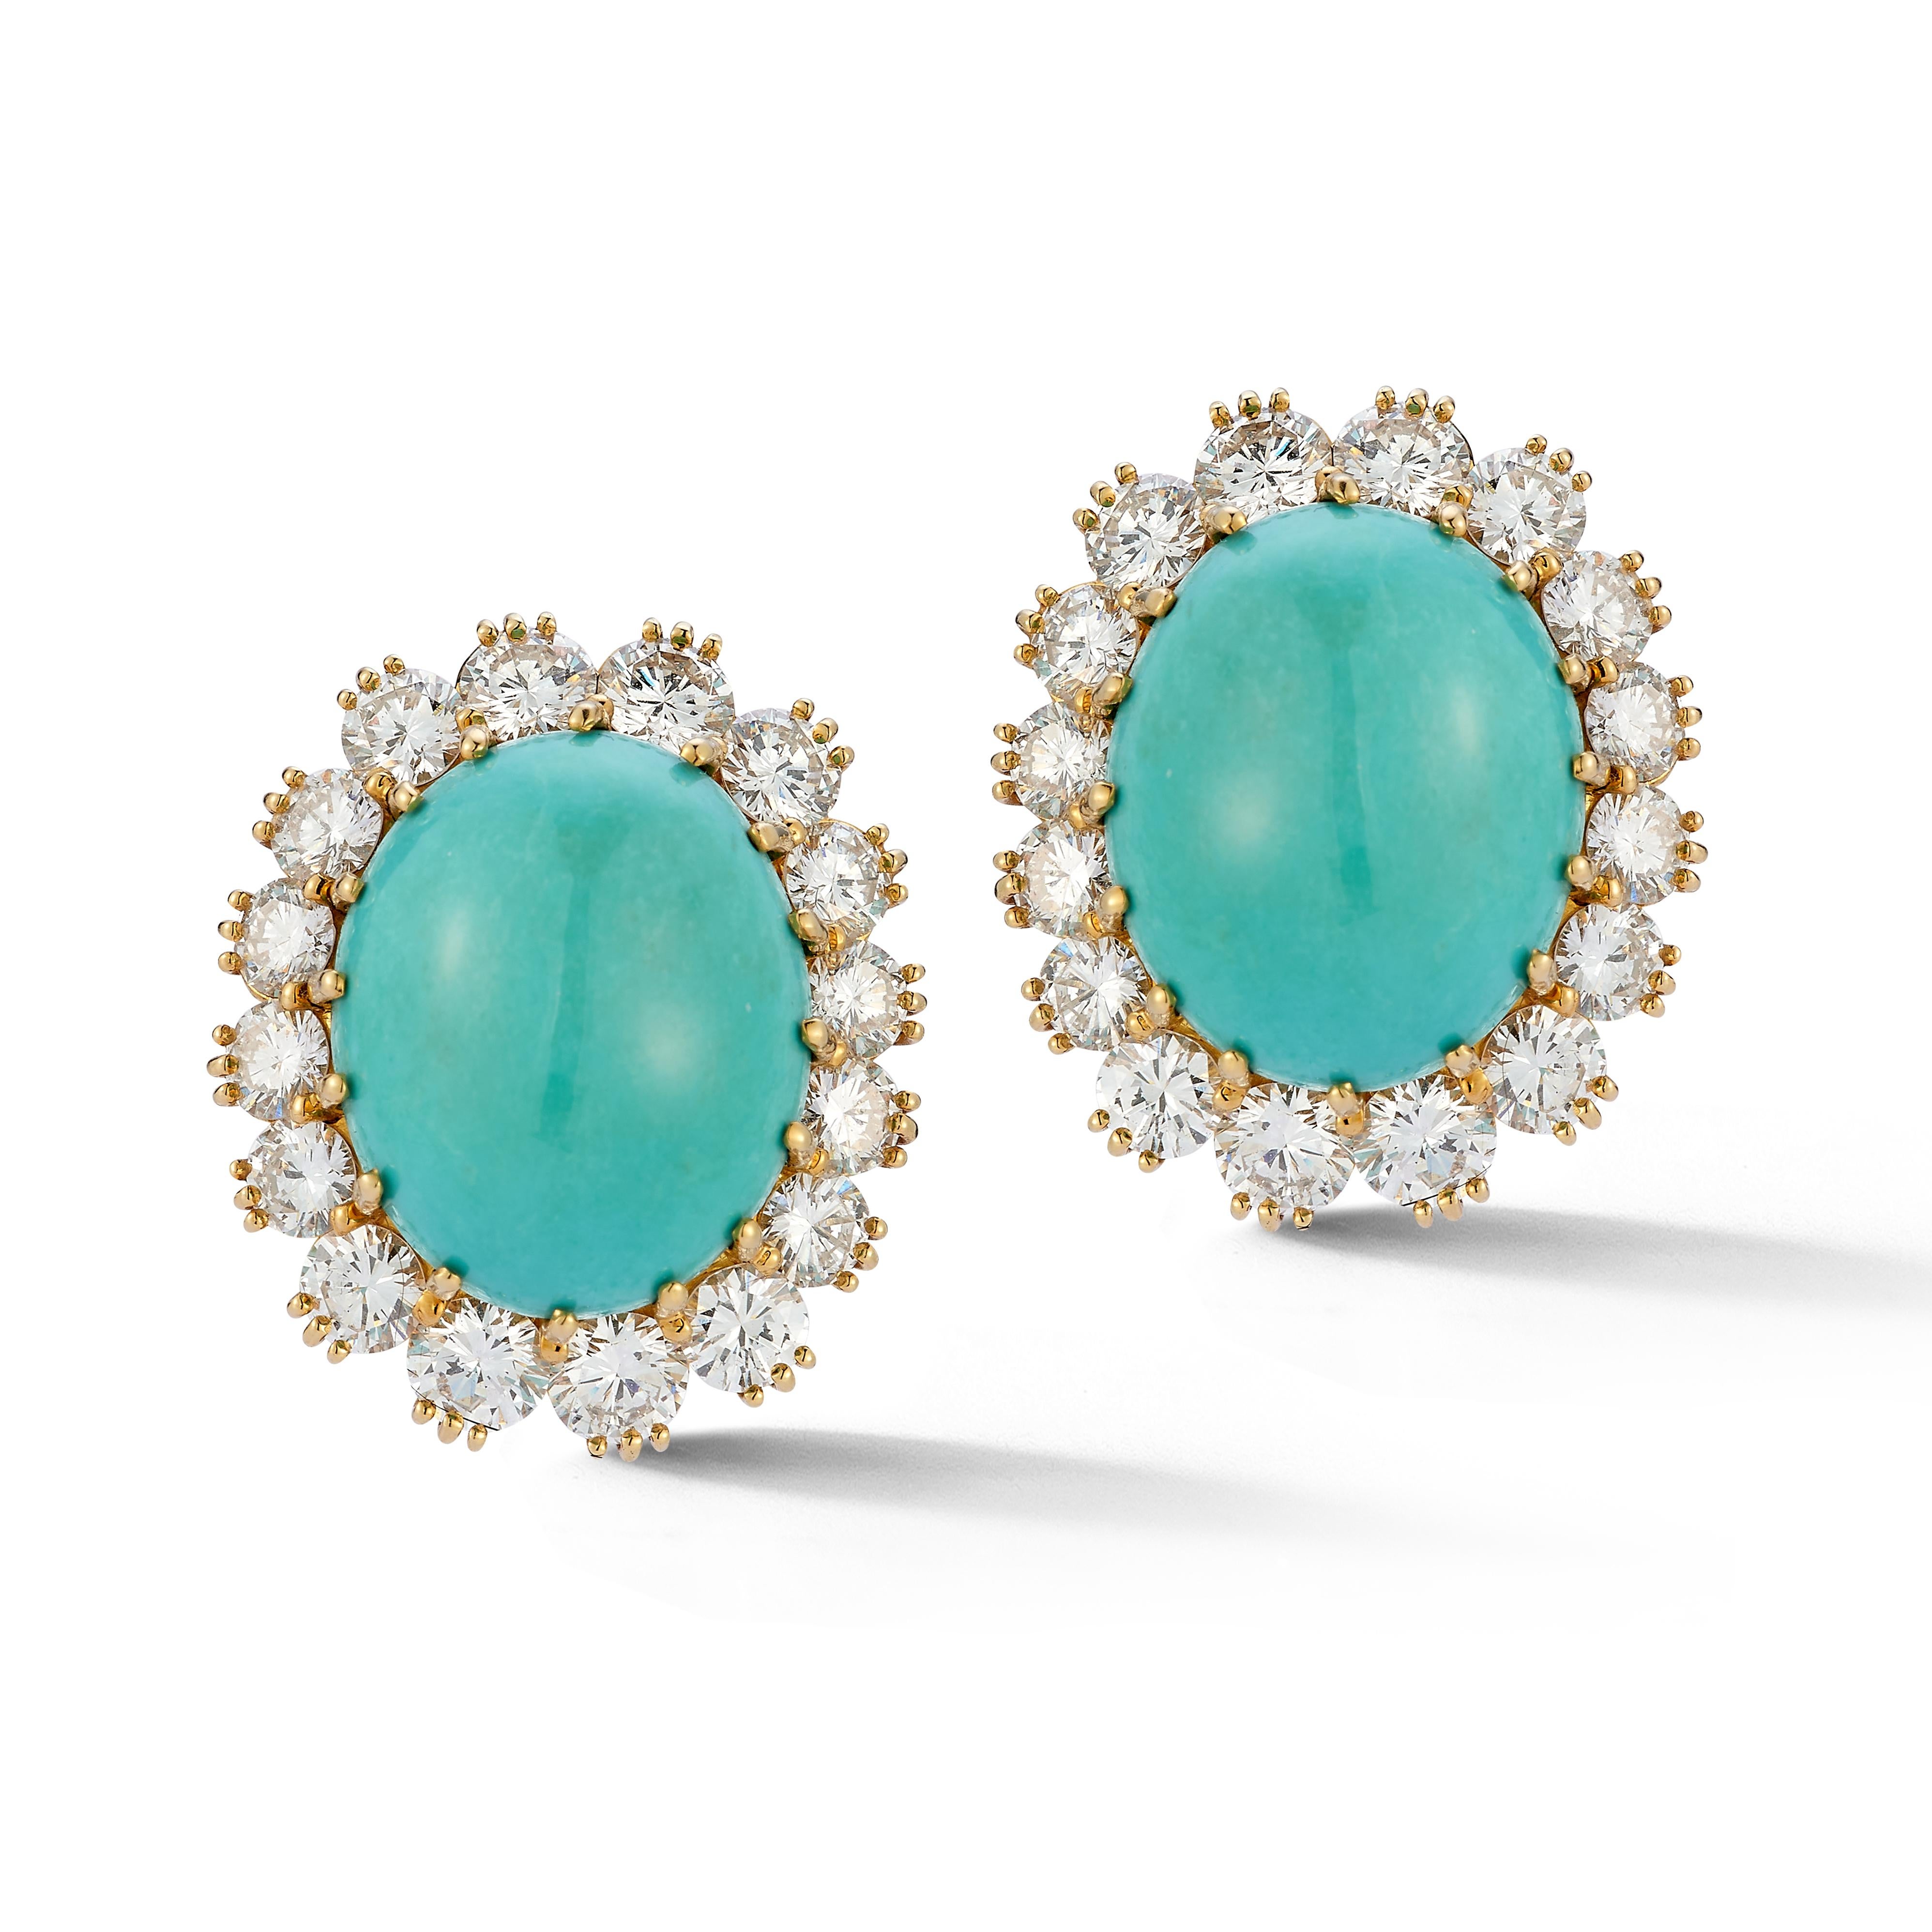 Van Cleef & Arpels Turquoise & Diamond Earrings

A pair of 18 karat yellow gold earrings each set with a halo of round cut diamonds with central cabochon turquoise  

Signed Van Cleef & Arpels N.Y. and numbered

Length: 1